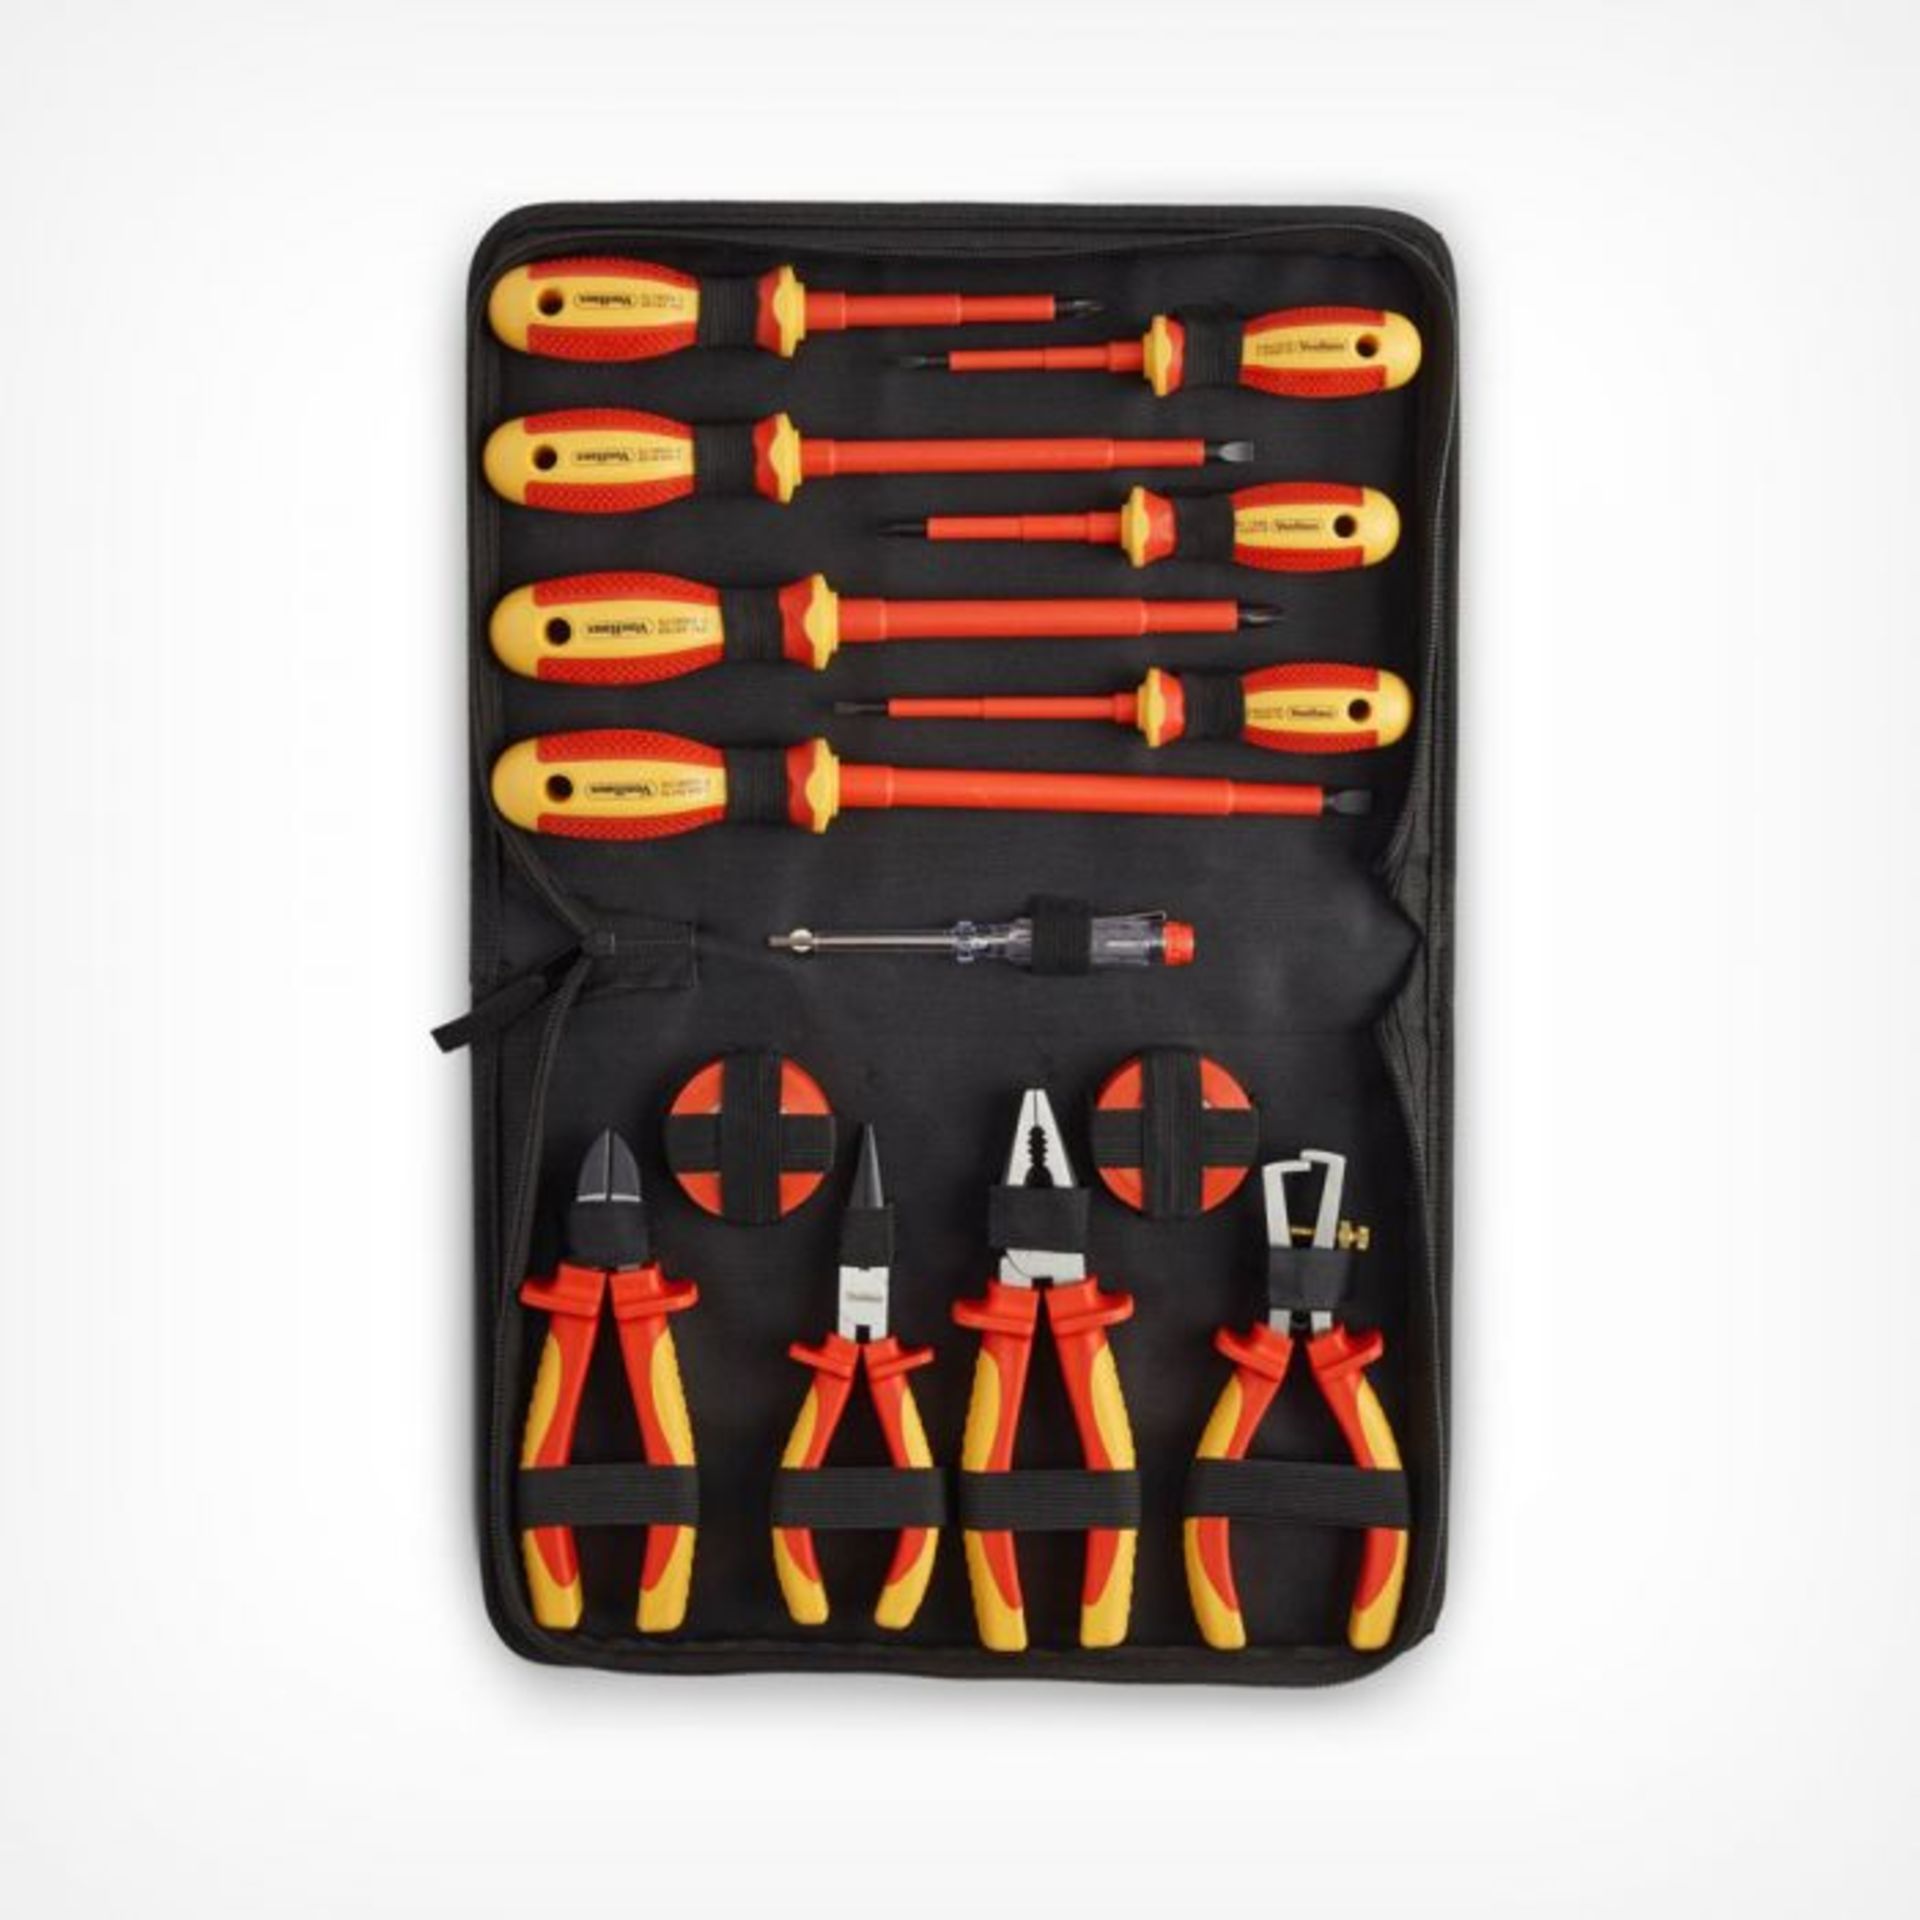 VDE Hand Tool Set. This fully VDE-rated set of insulated hand tools provides you with the perfect